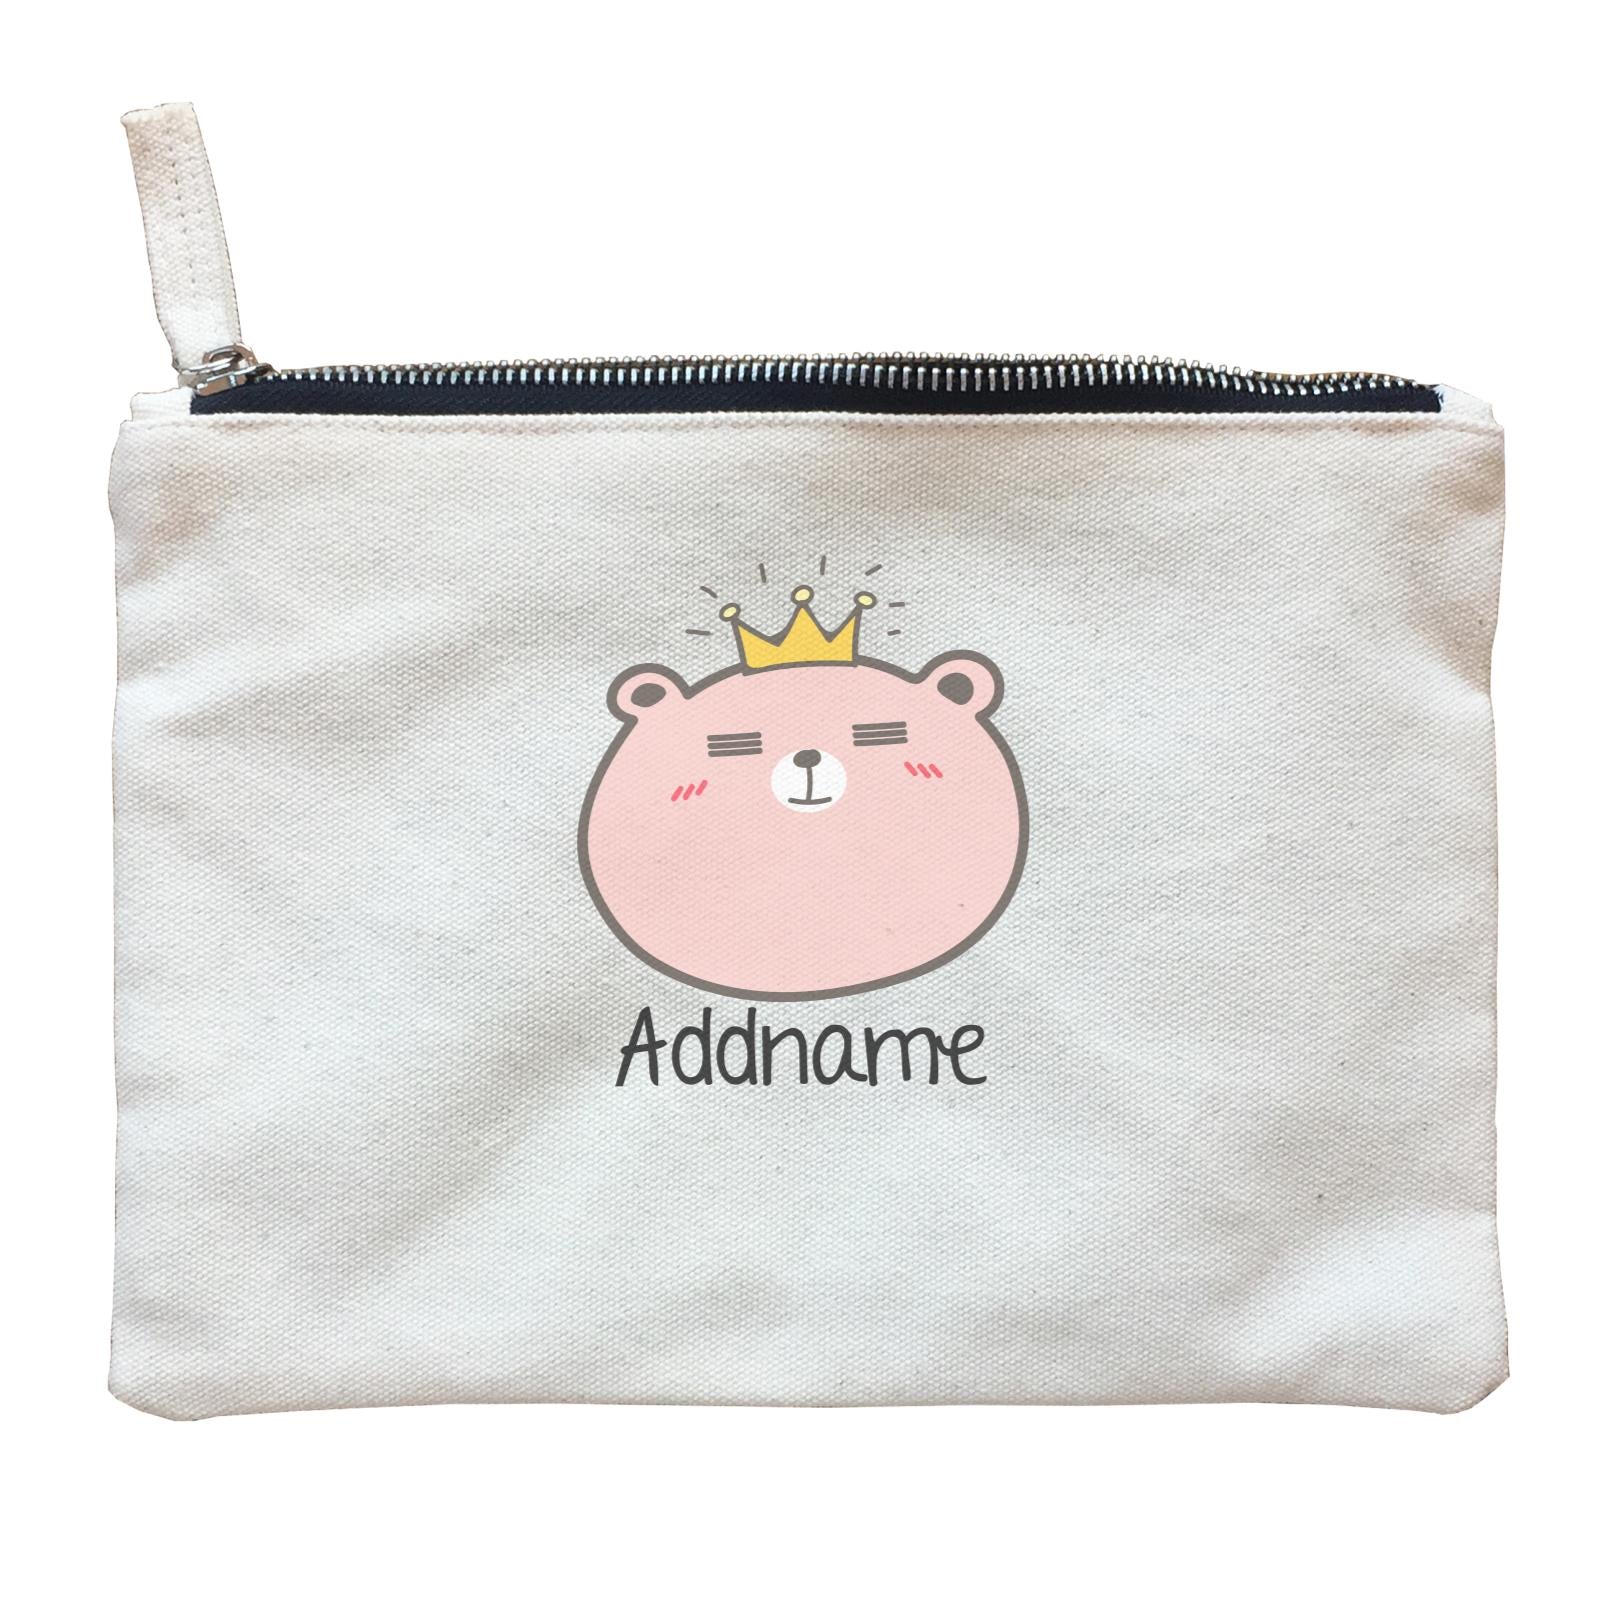 Cute Animals And Friends Series Cute Pink Bear With Crown Addname Zipper Pouch